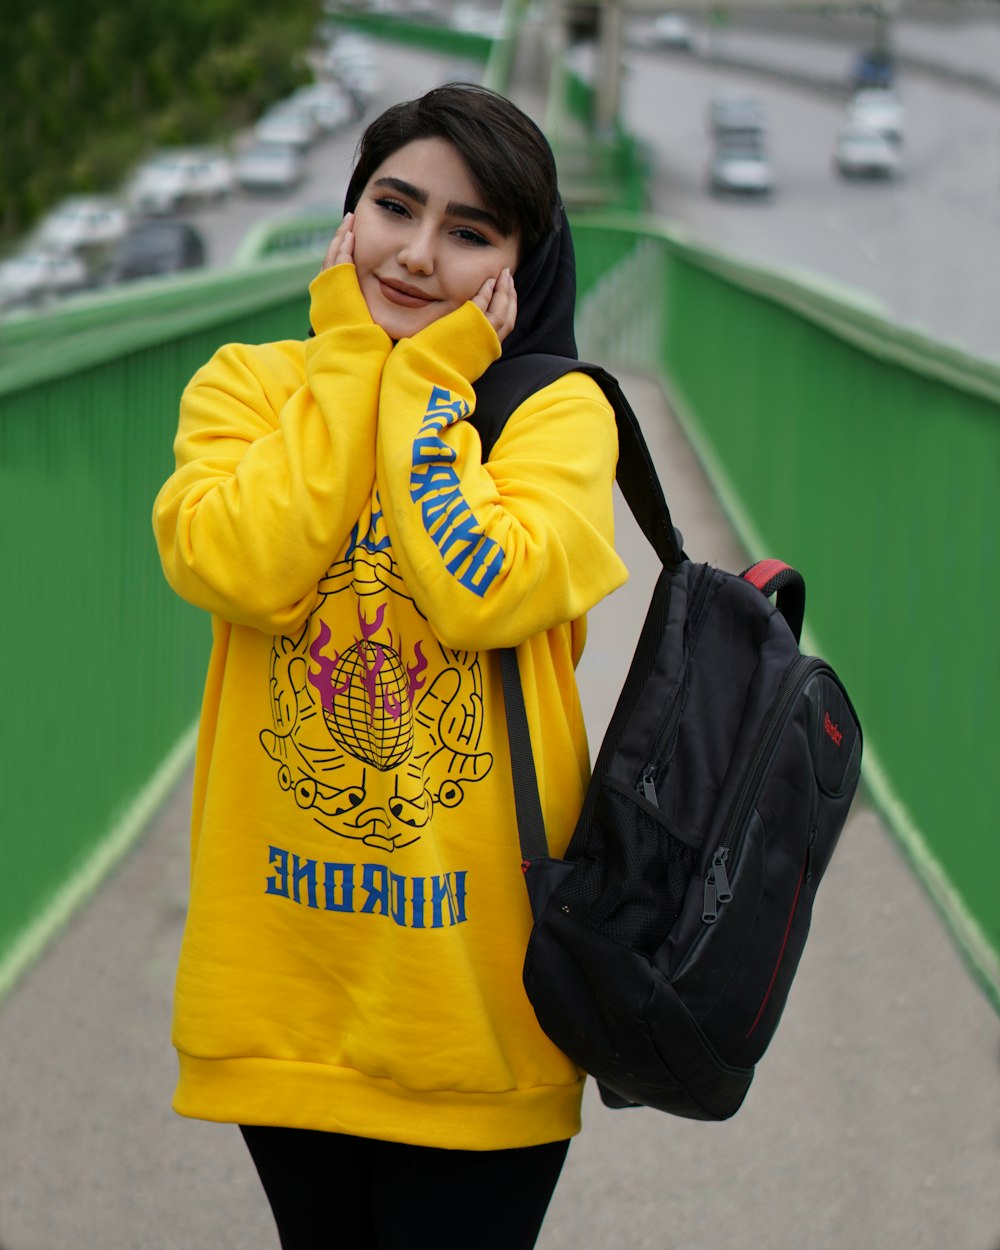 woman in yellow sweater holding black backpack